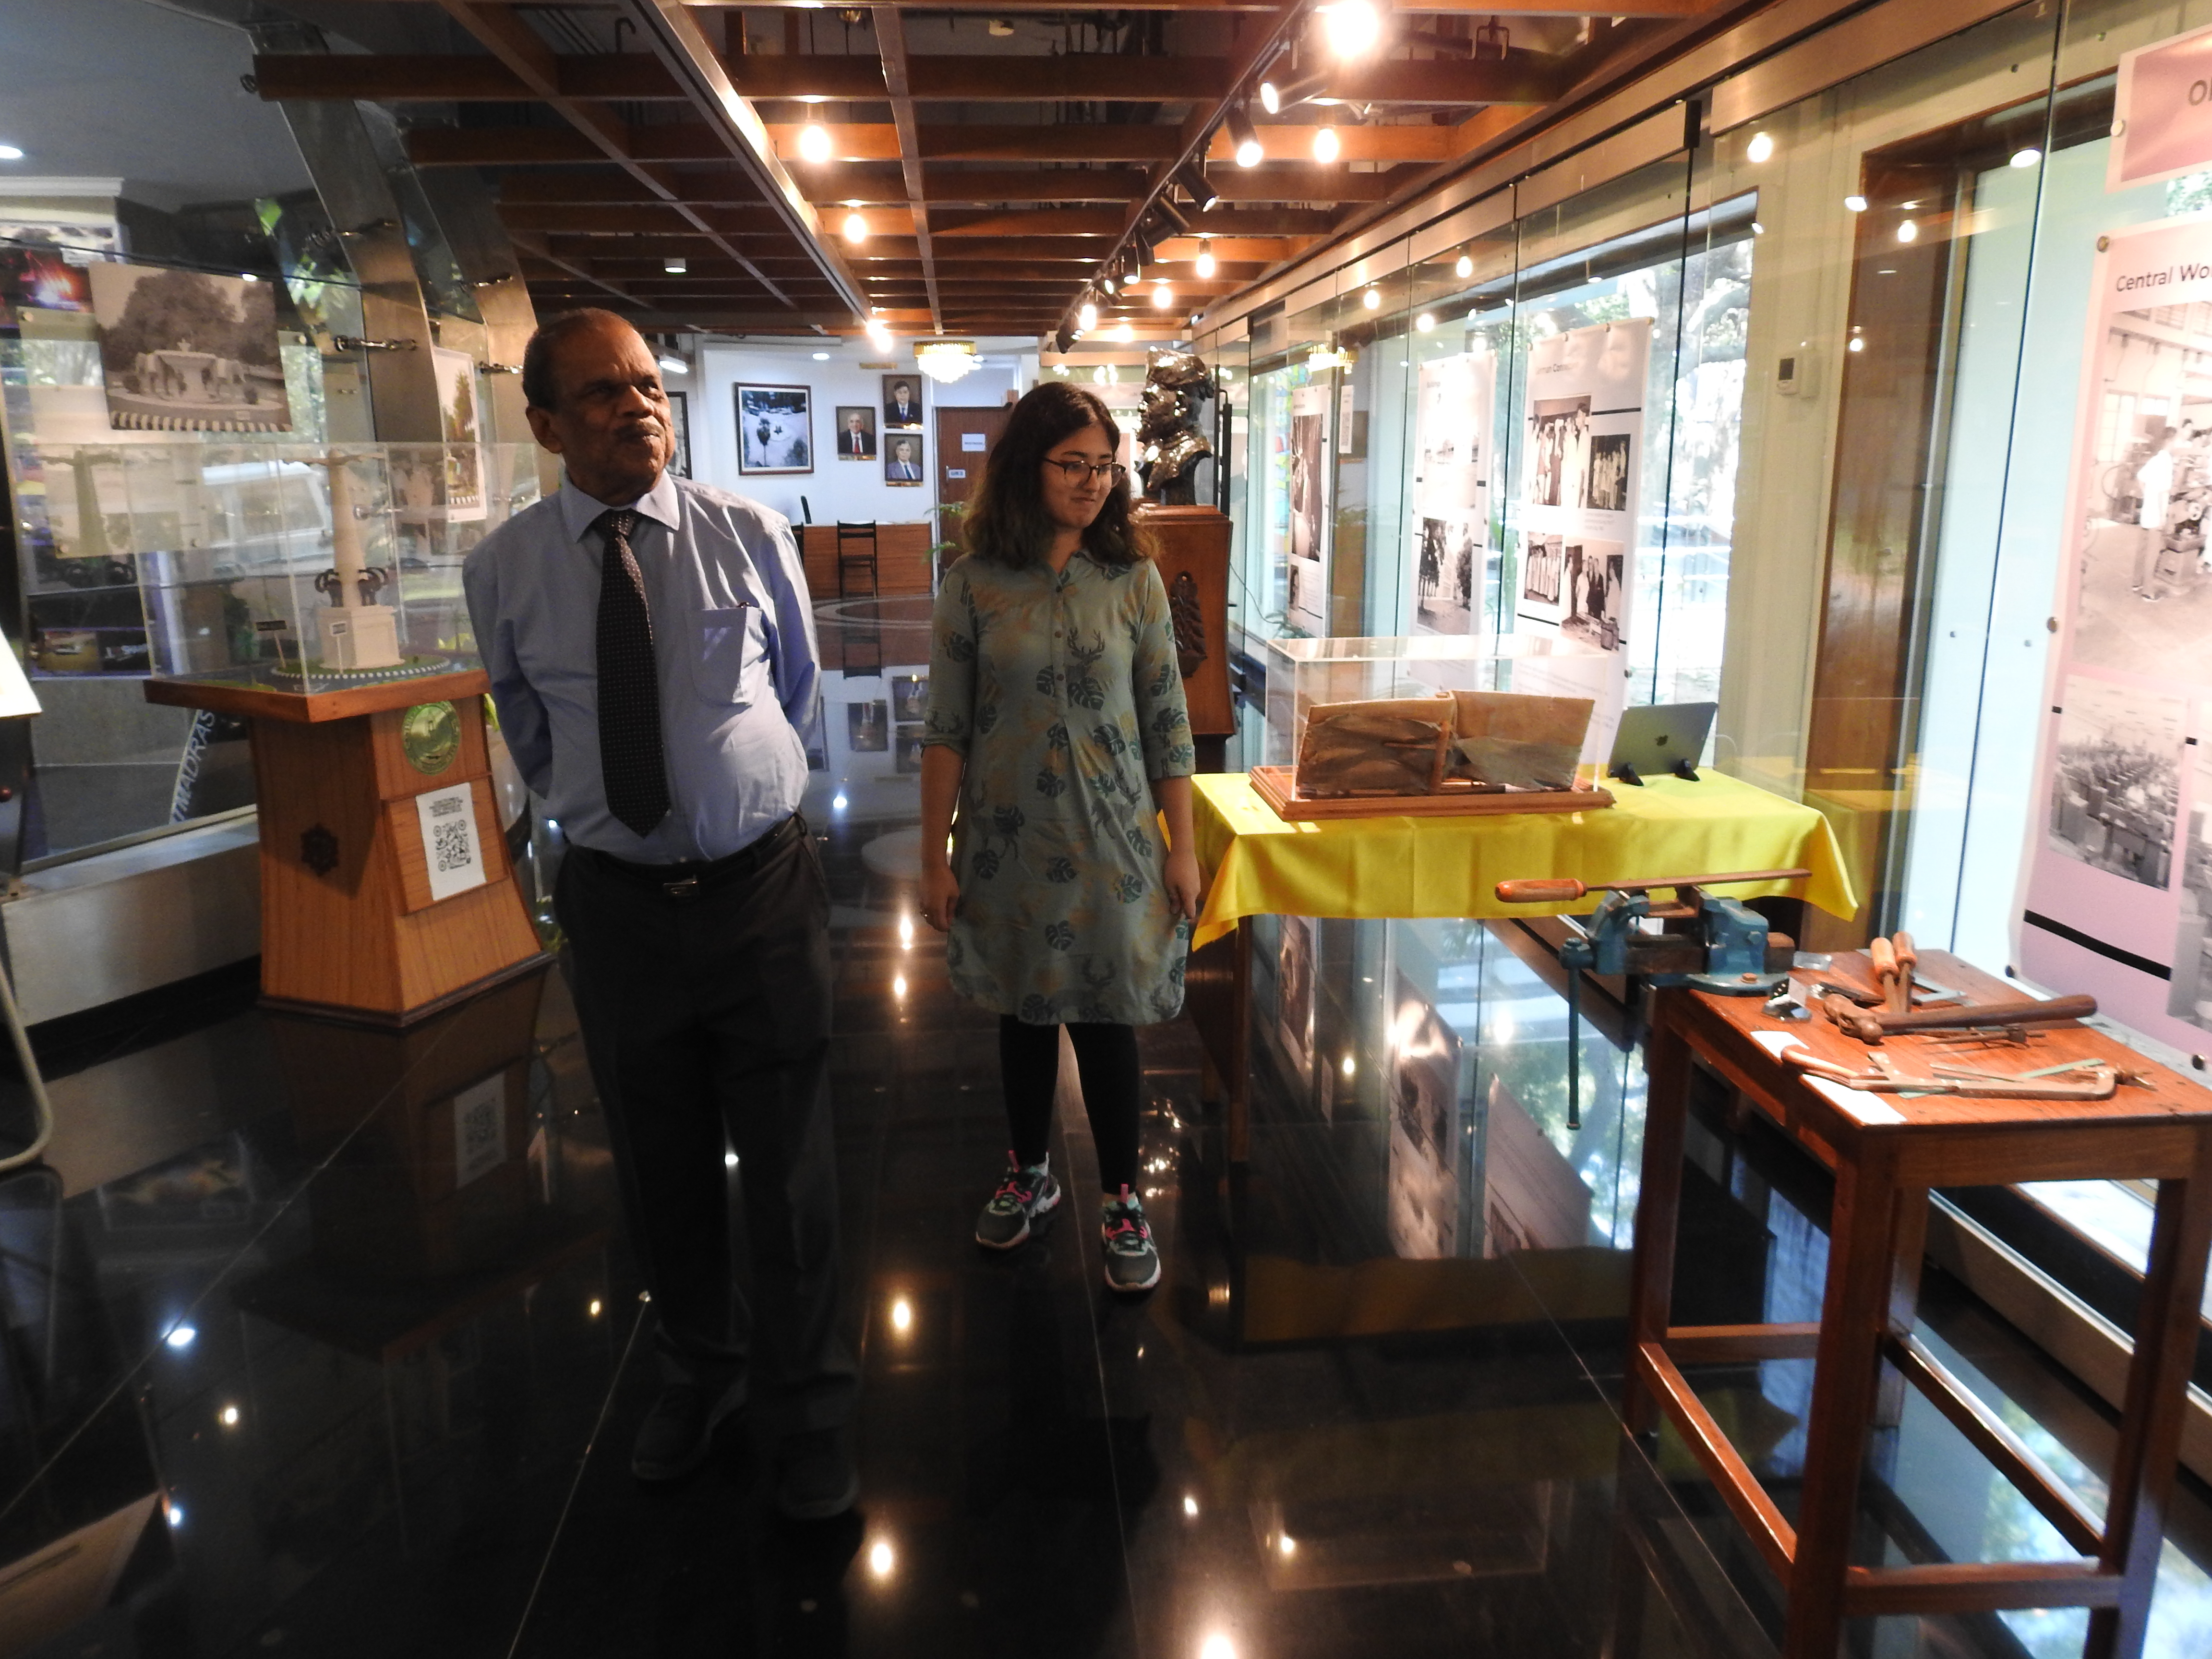 Dr. A. Sivathanu Pillai is guided around the Heritage Centre